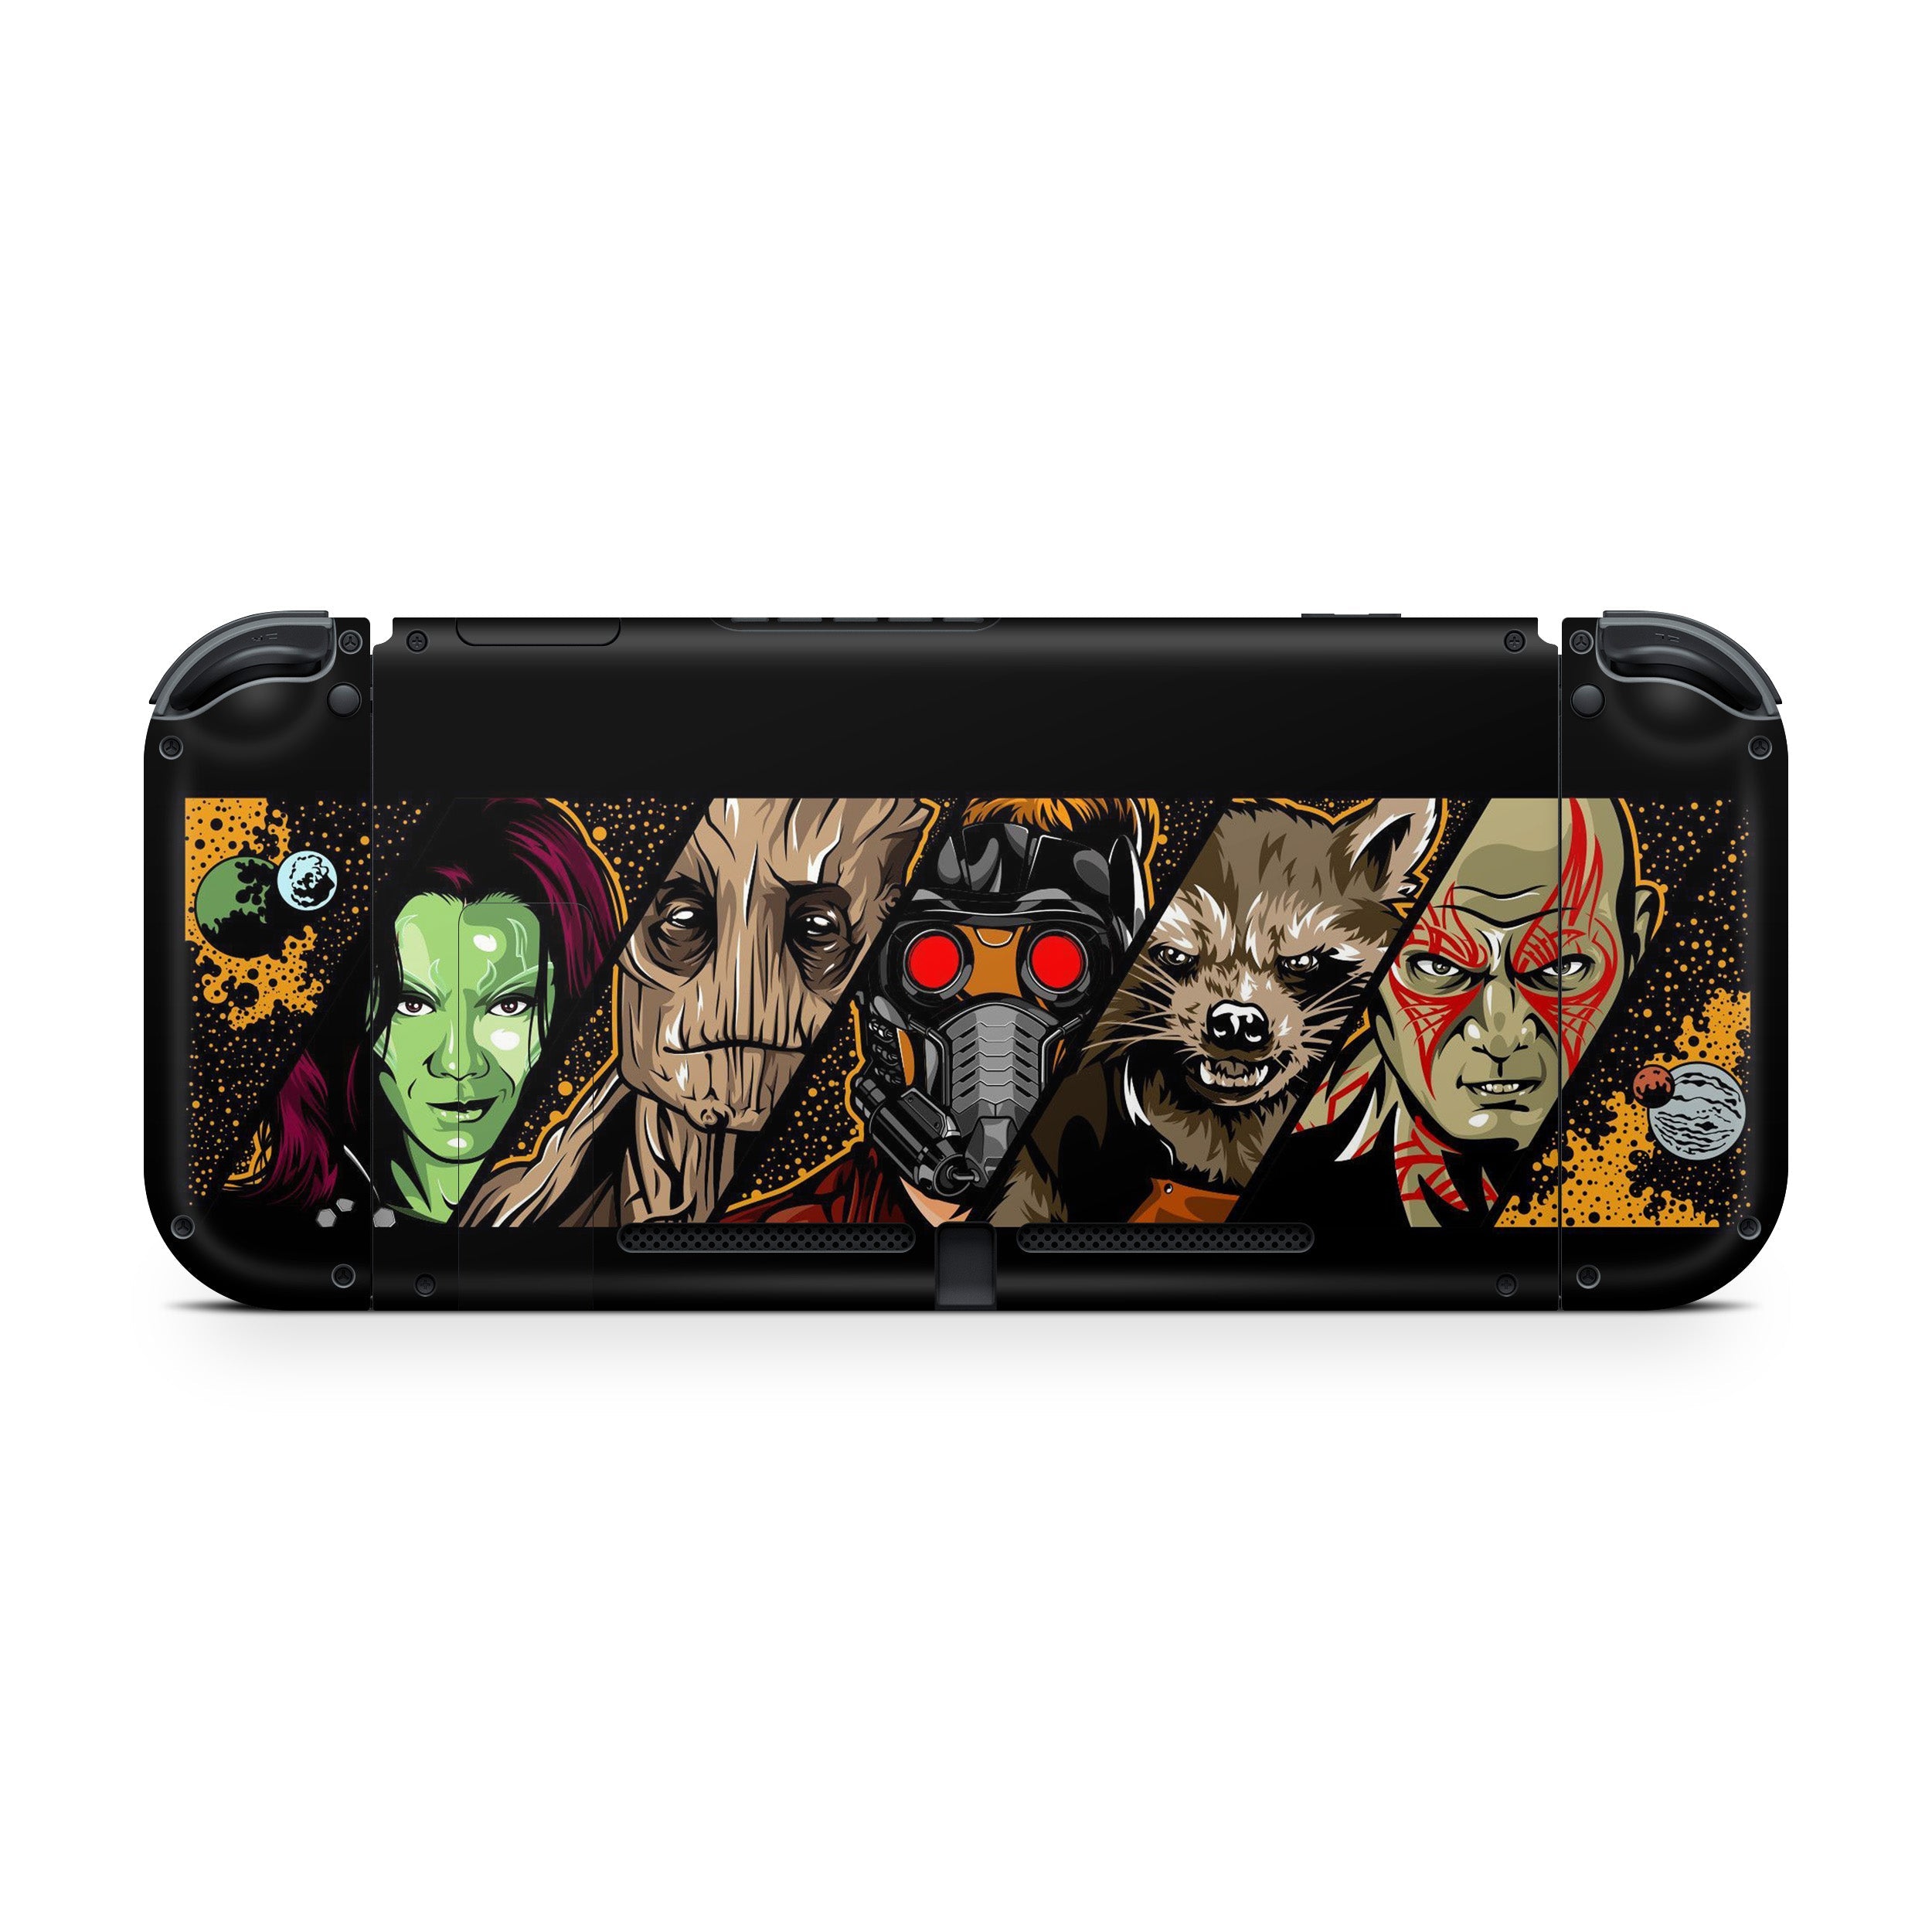 A video game skin featuring a Marvel Guardians of the Galaxy design for the Nintendo Switch.